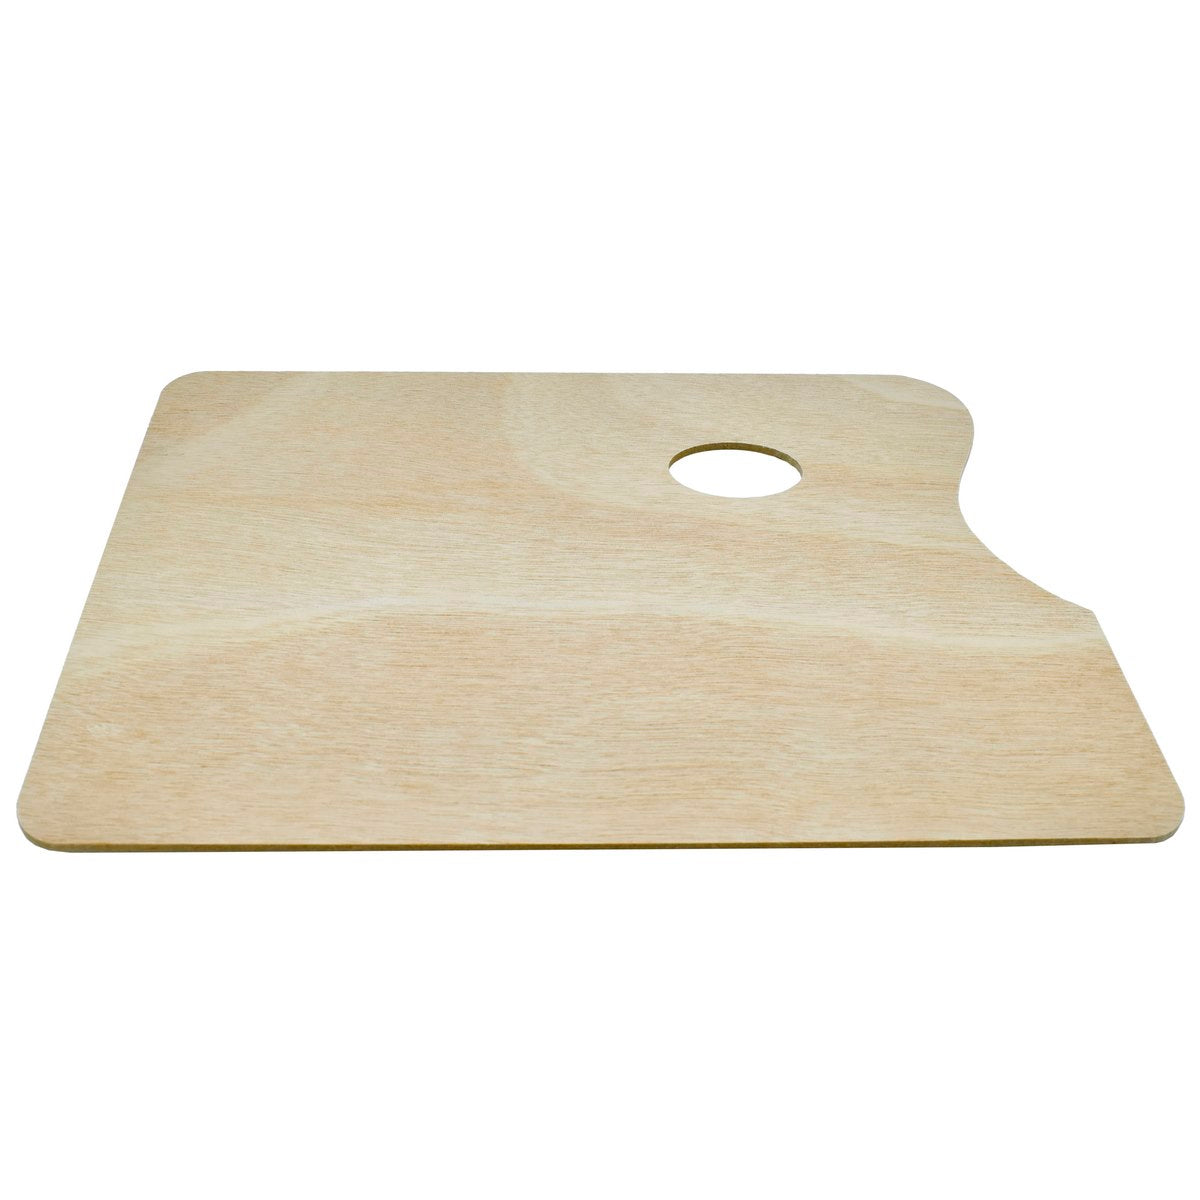 jags-mumbai Wooden Slice Elevate Your Artwork with the Wooden Plate Drawing Square Shape 24x30cm SP24X30